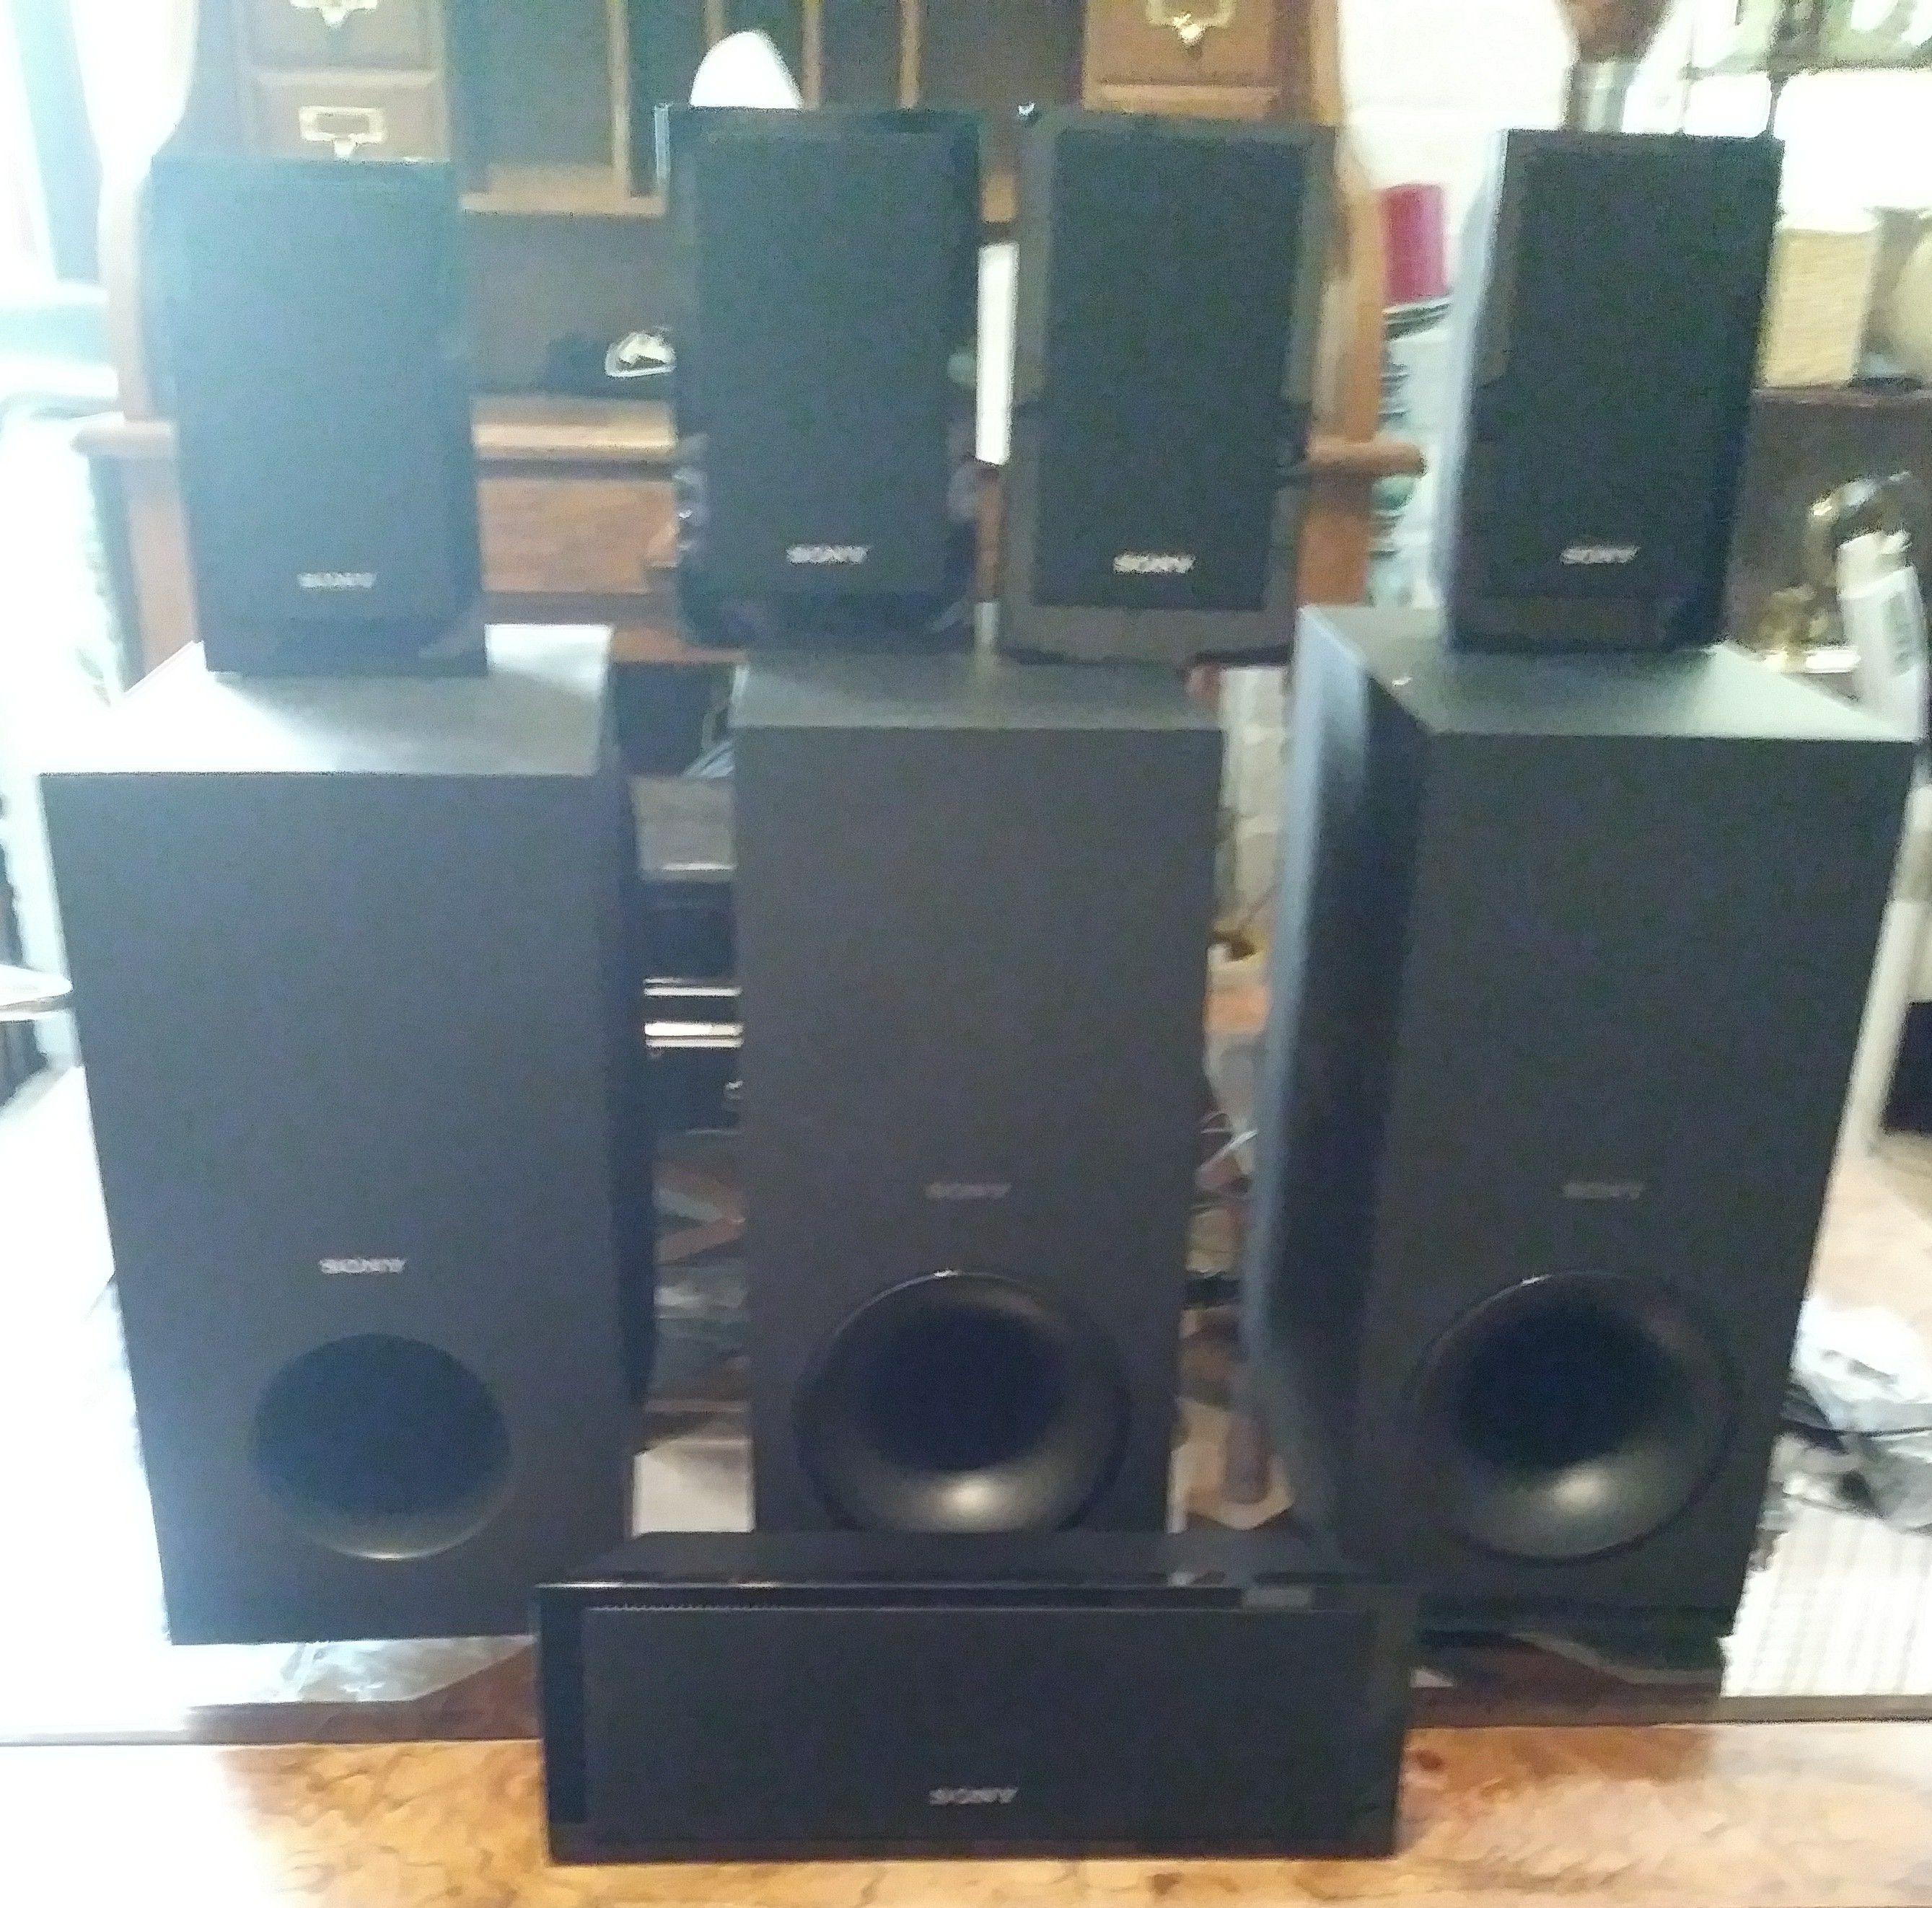 nauwelijks gouden Kantine SONY 5.1 HOME THEATER SURROUND SPEAKERS - SS-WS101, SS-CT-101 (2),  SS-TS102(4) - NEW for Sale in Houston, TX - OfferUp